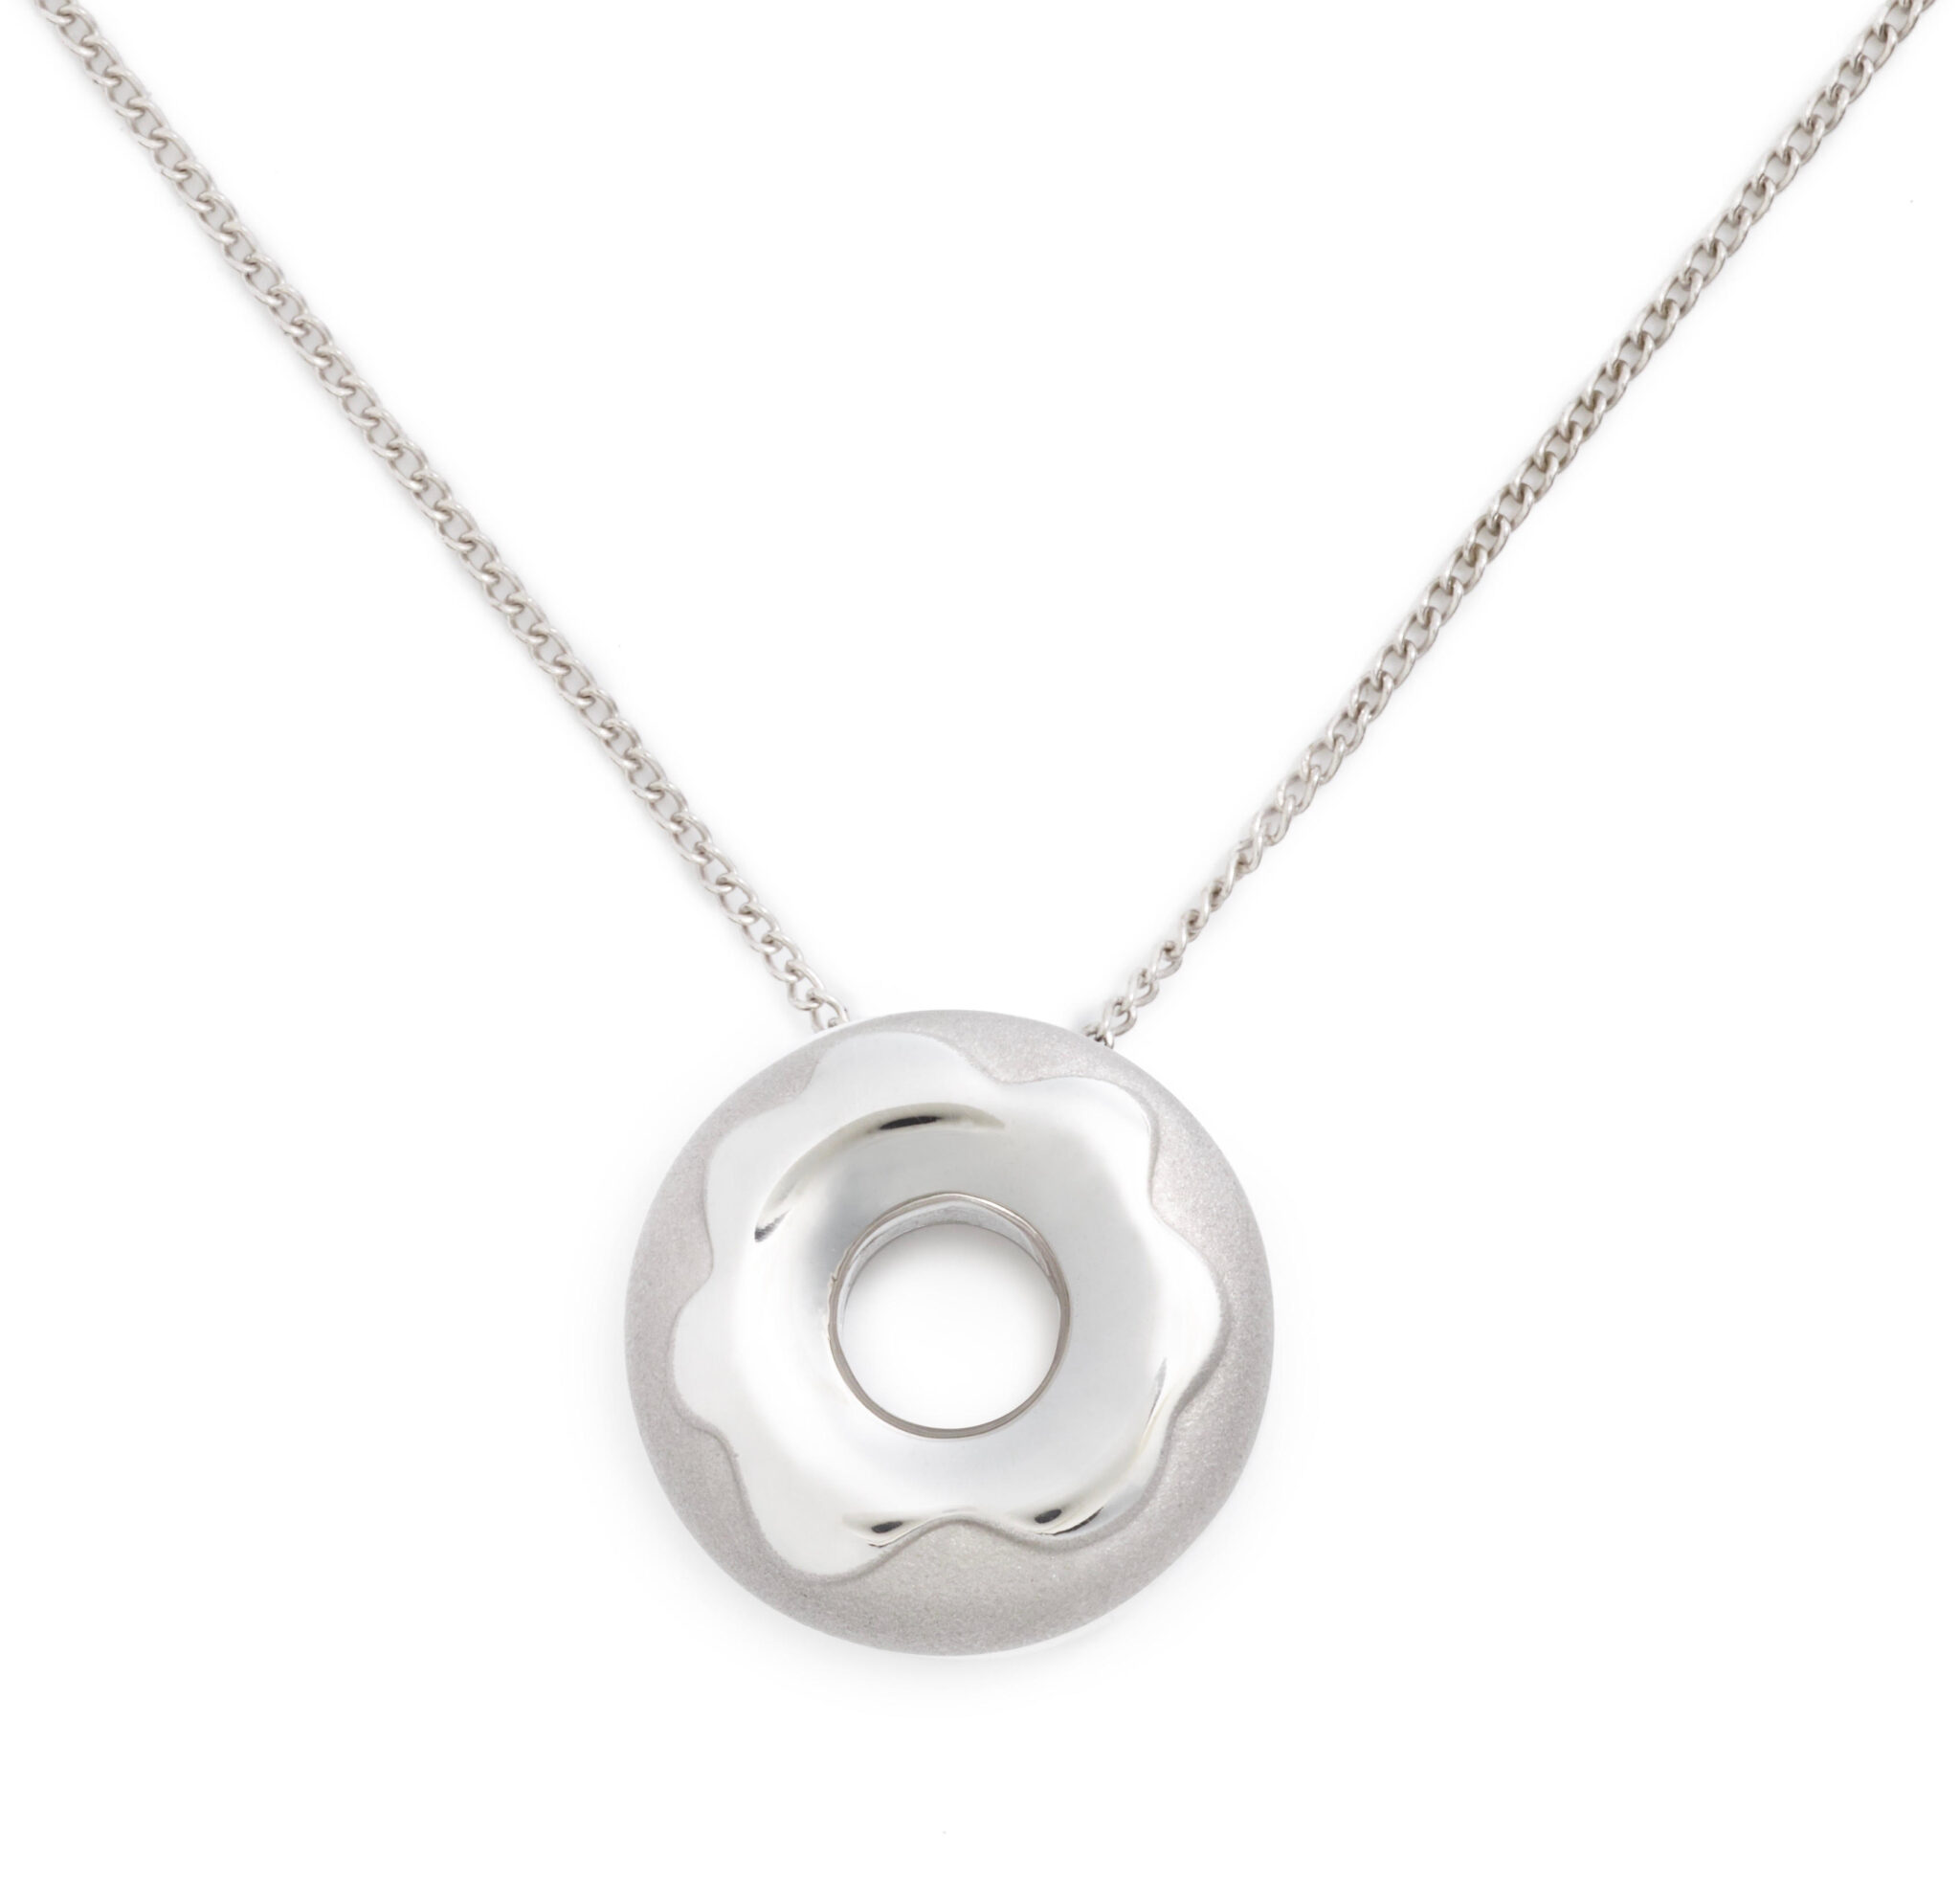 Glazed Doughnut Necklace, Sterling Silver - Delicacies